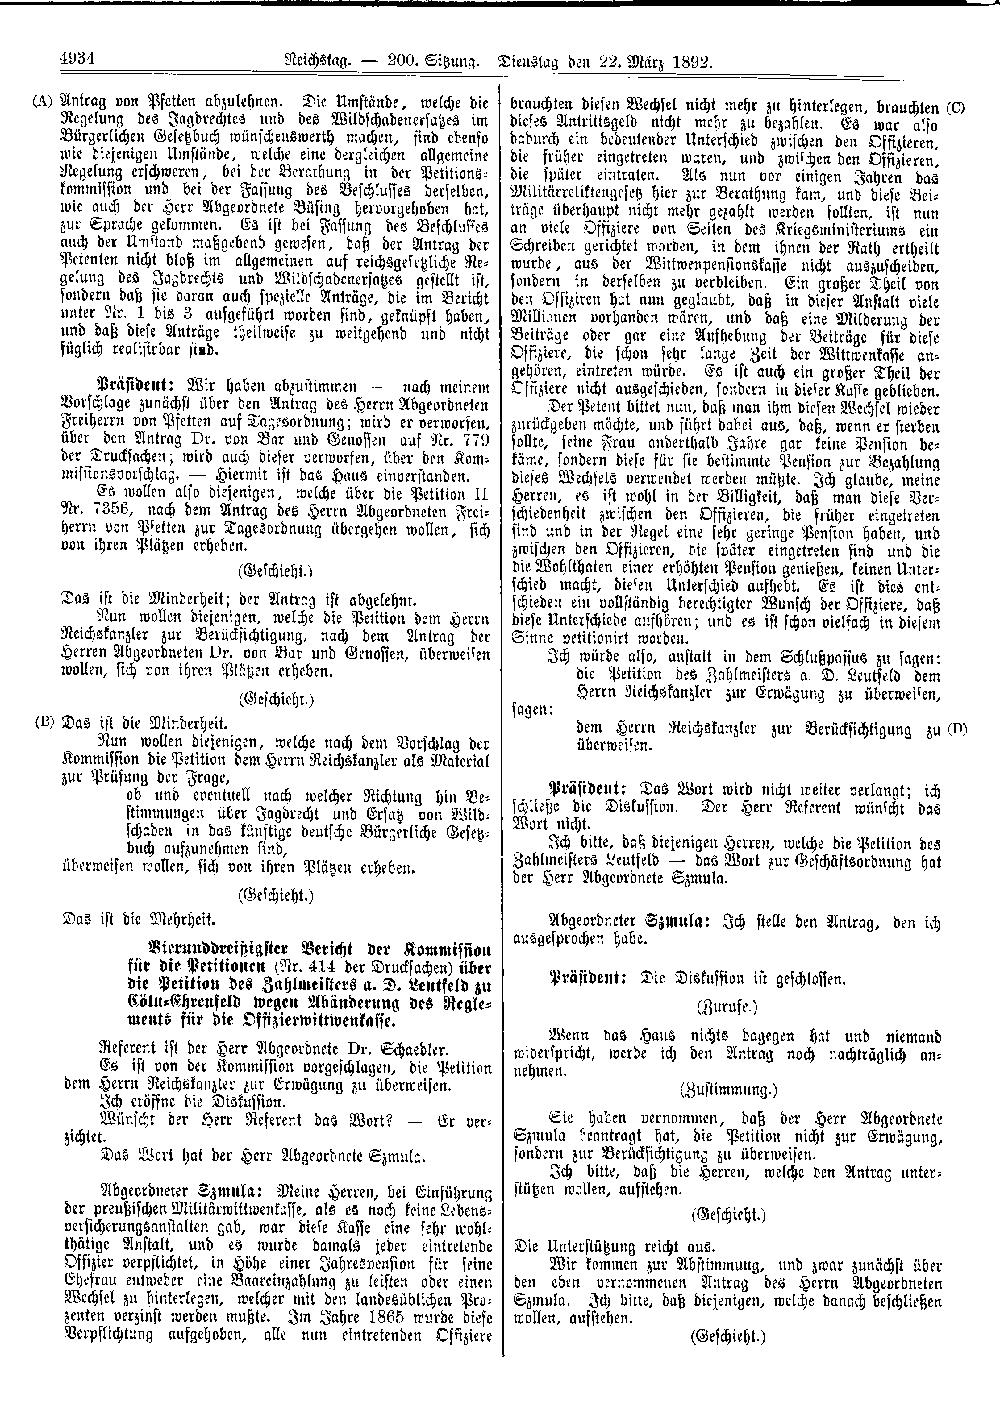 Scan of page 4934